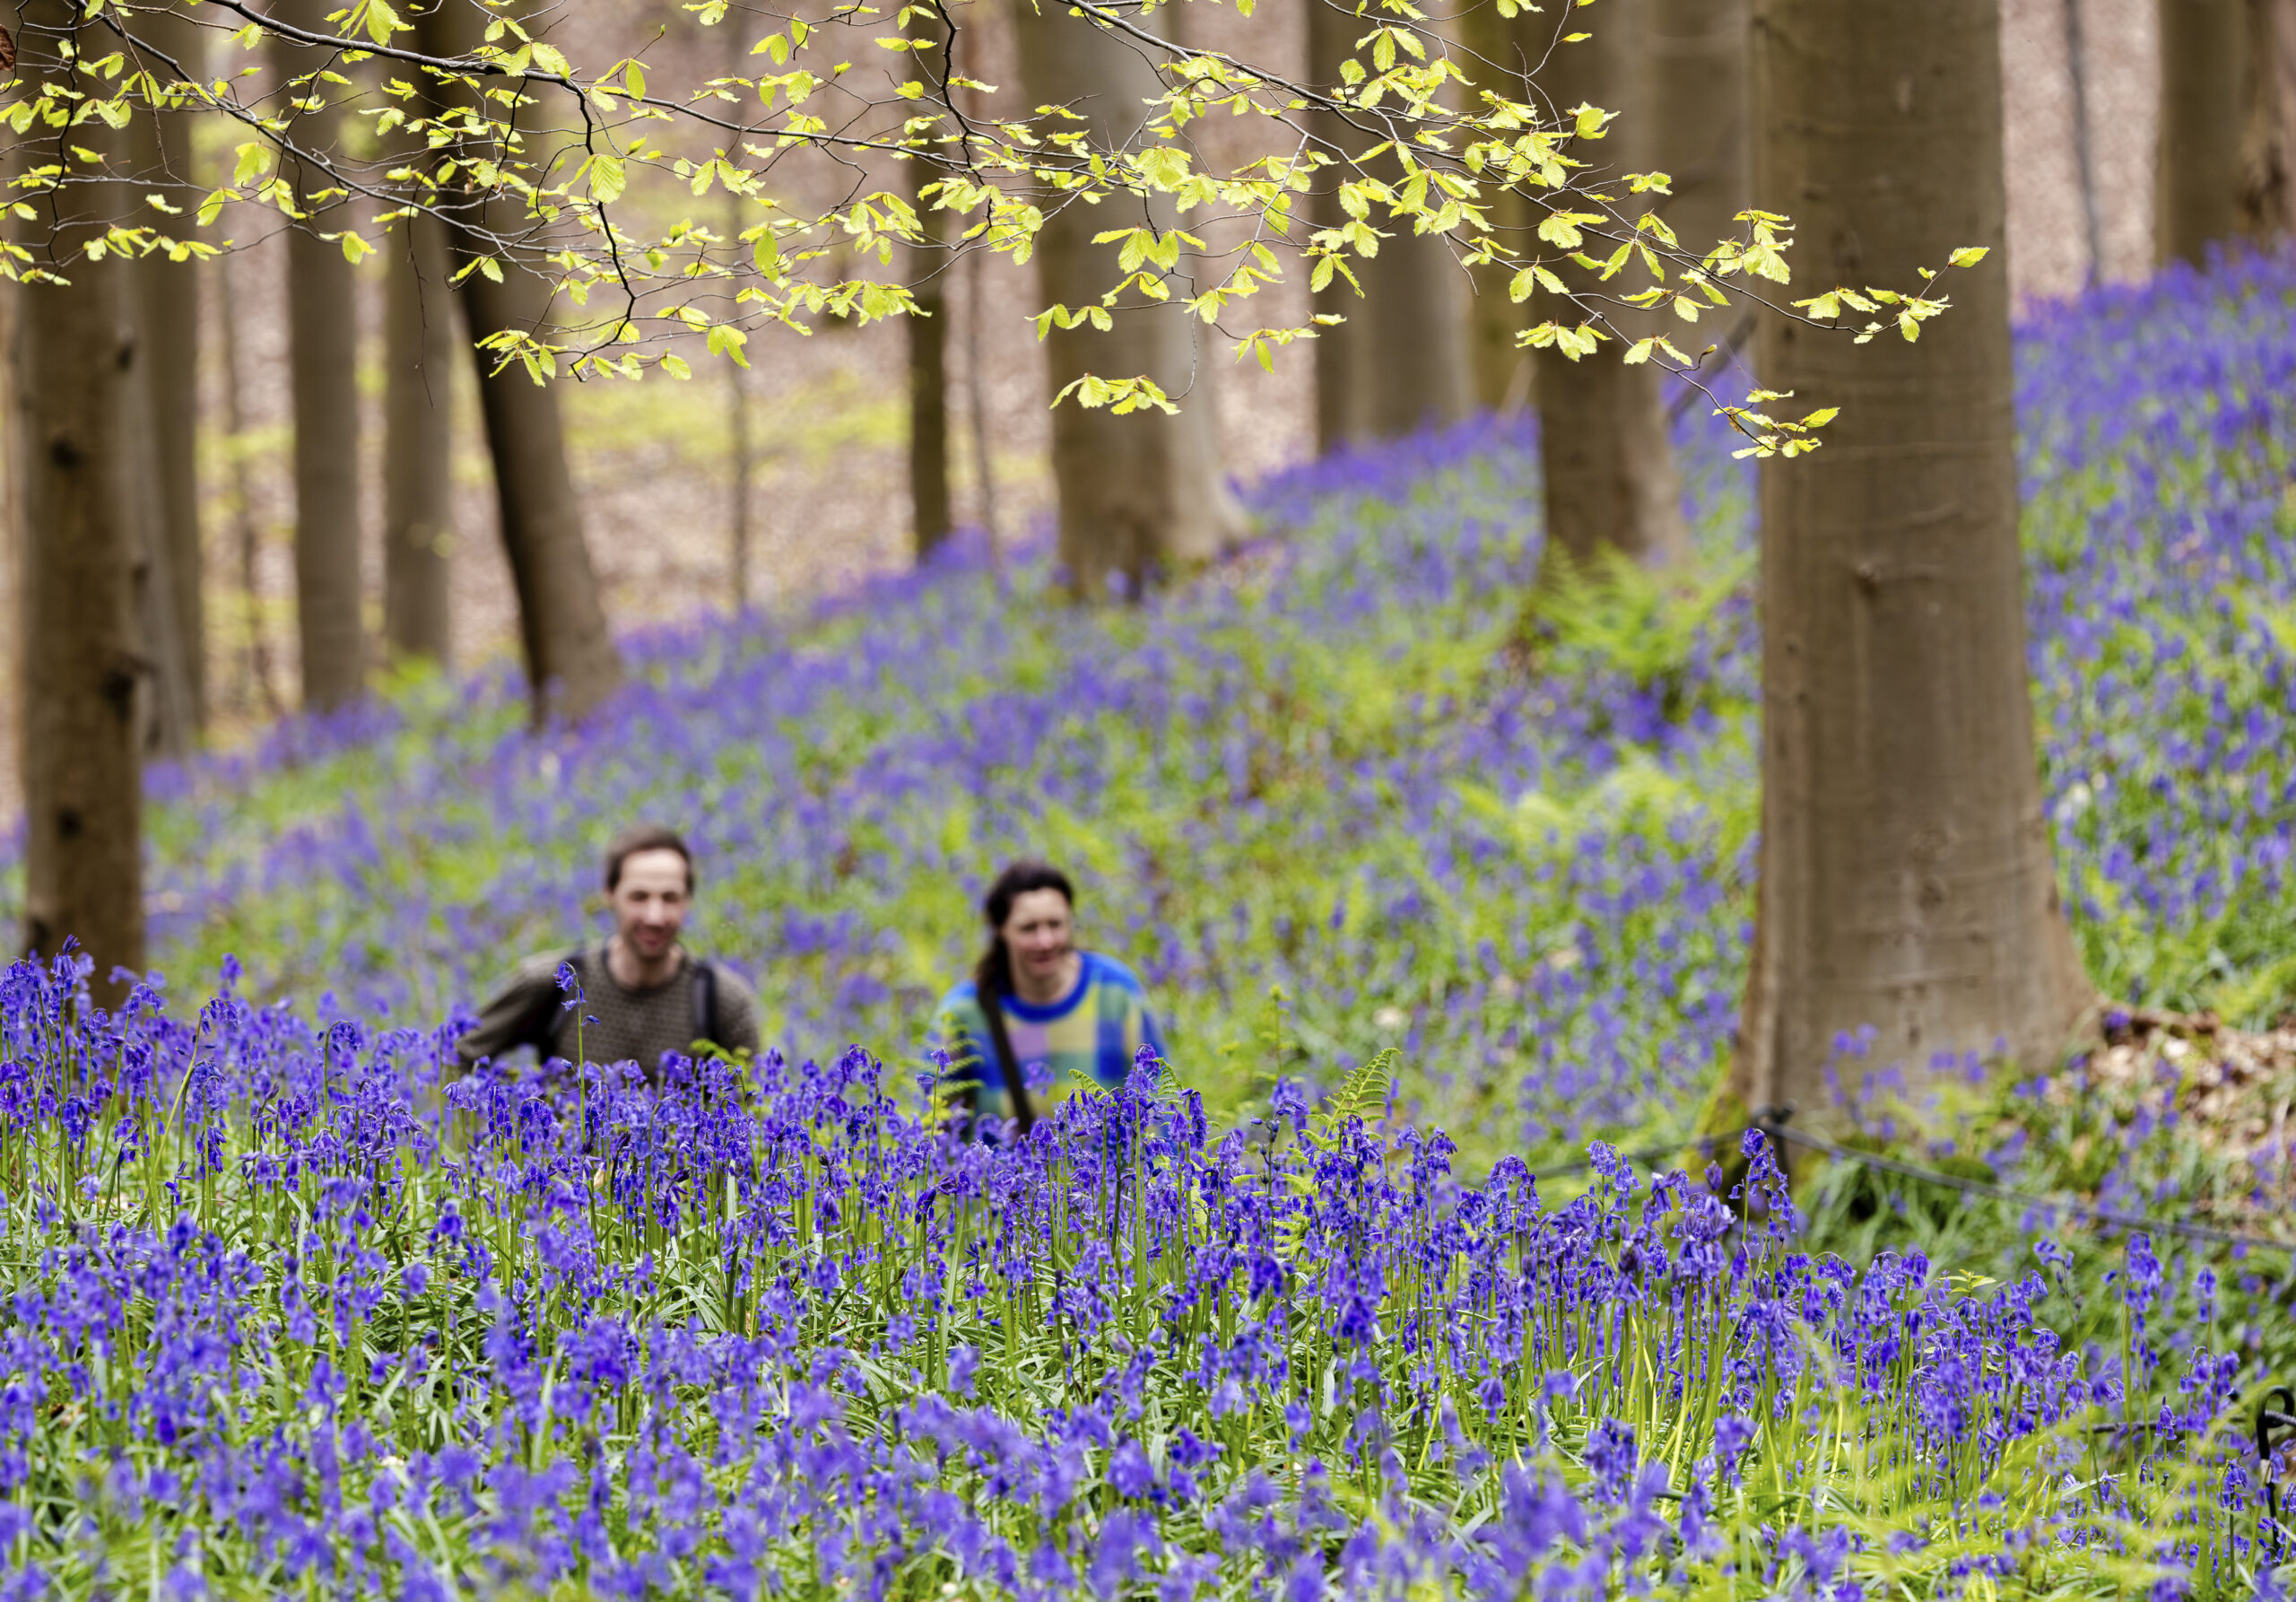 Two people walk among the Bluebell flowers, also known as wild hyacinth, bloom in the Hallerbos forest in Halle, Belgium, on Thursday, April 11, 2024. Bluebells are particularly associated with ancient woodland where it can dominate the forest floor to produce carpets of violet–blue flowers. (AP Photo/Geert Vanden Wijngaert)